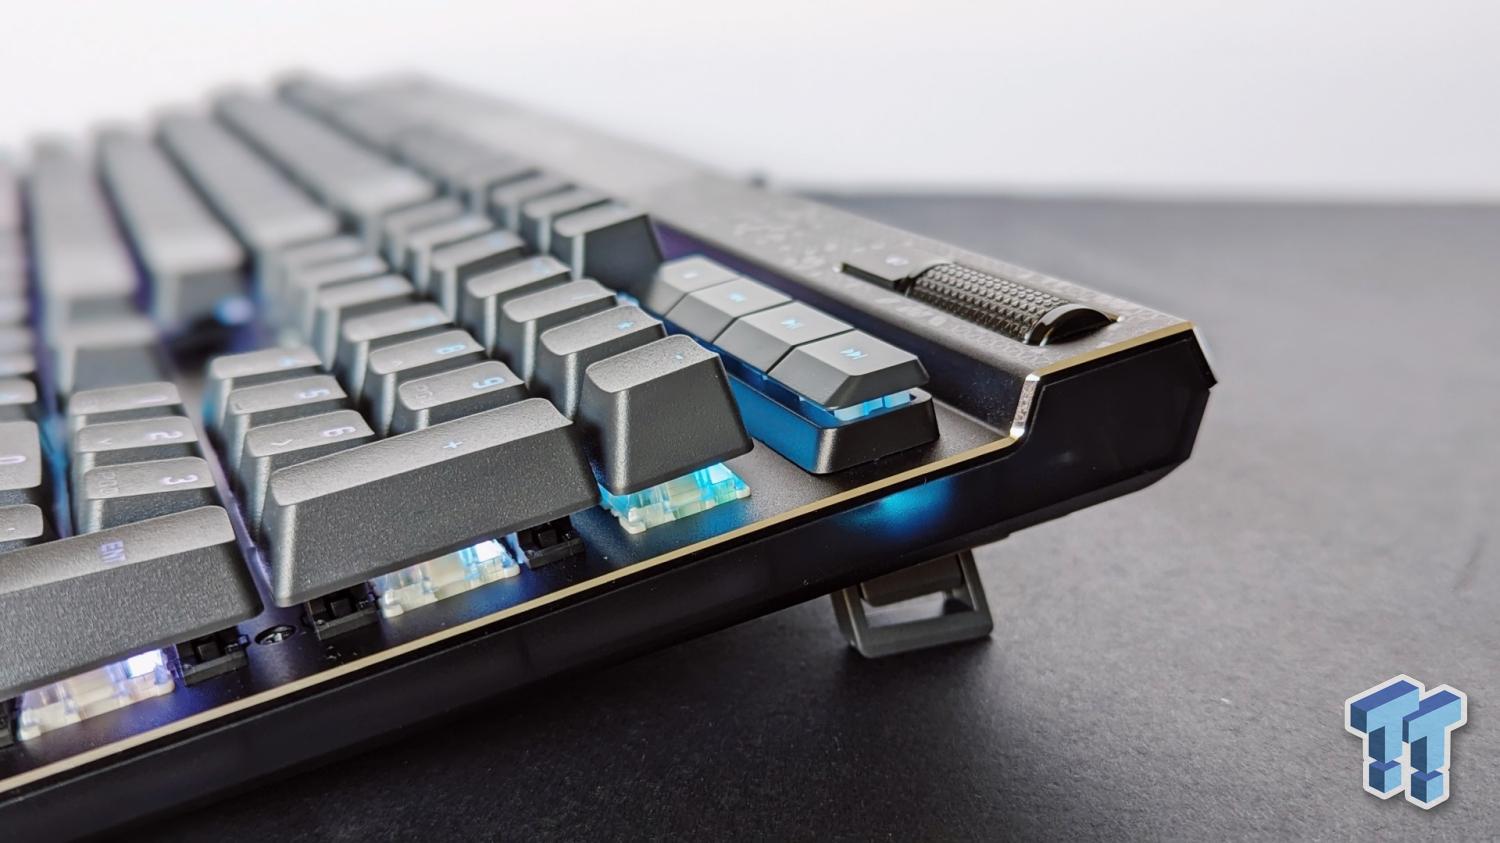 Corsair K70 Max review: Fancy magnetic switches and big